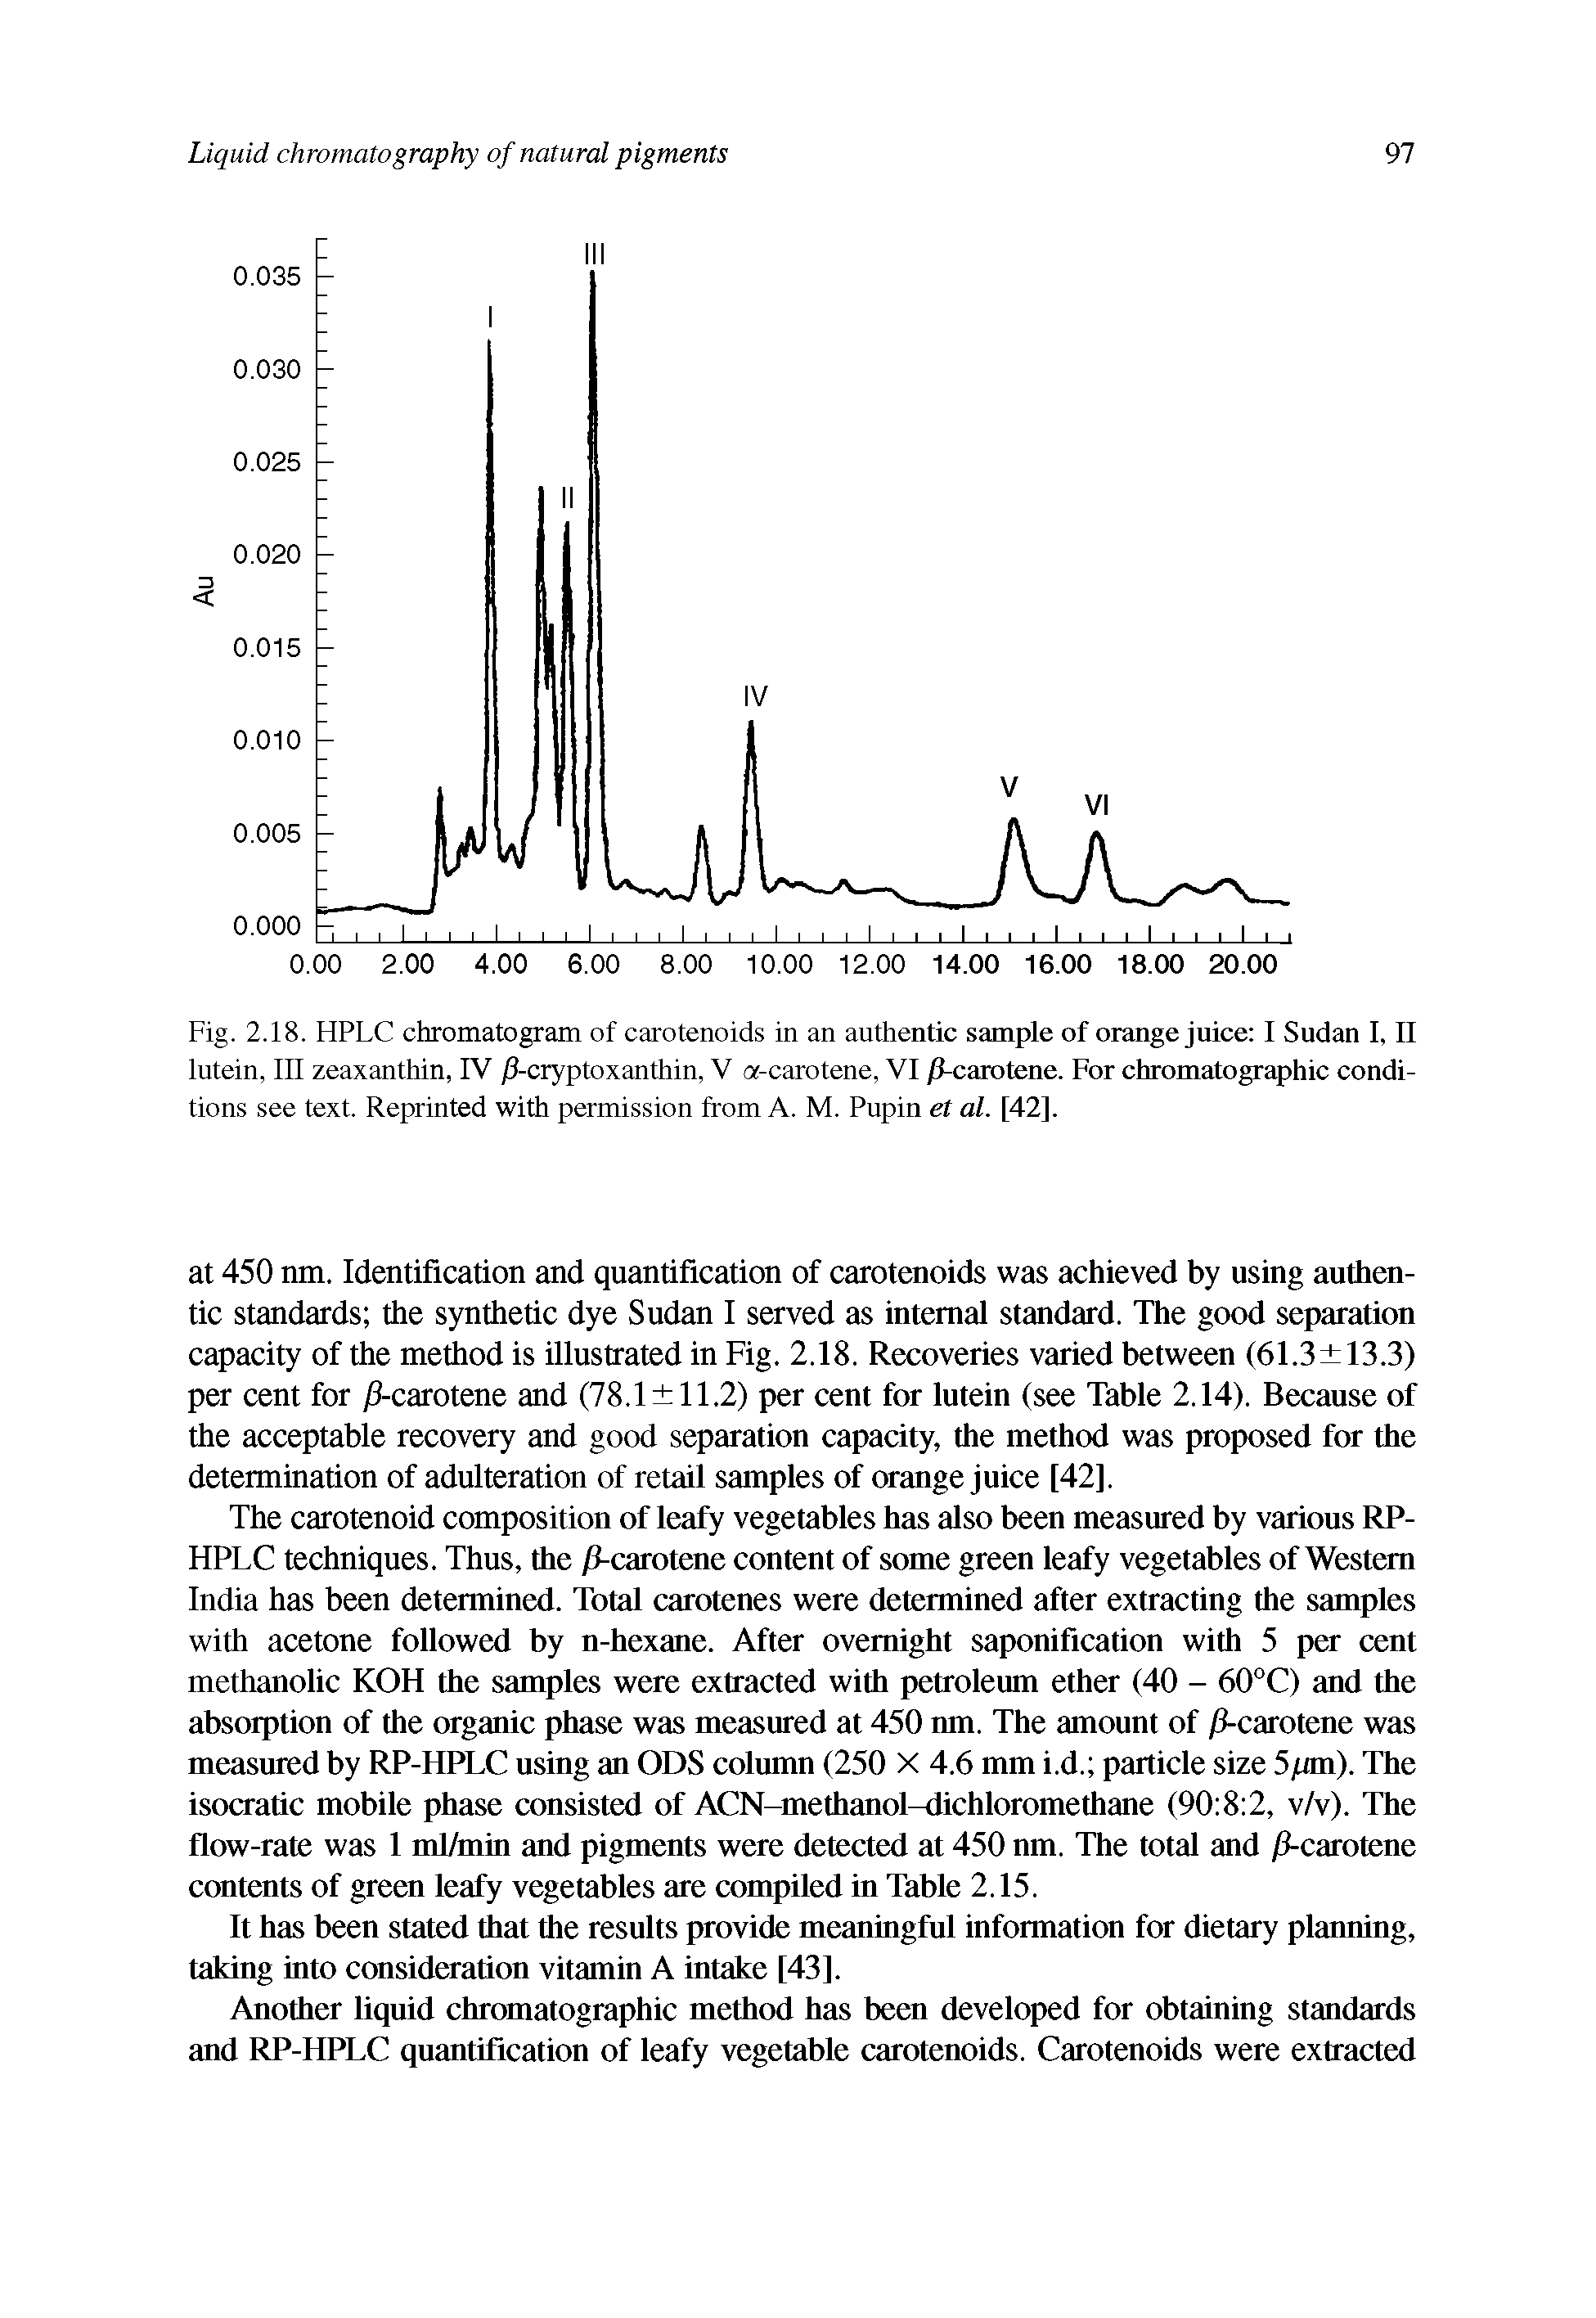 Fig. 2.18. HPLC chromatogram of carotenoids in an authentic sample of orange juice I Sudan I, II lutein, III zeaxanthin, IV /J-cryploxanlhin. V a-carotene, VI / -carotene. For chromatographic conditions see text. Reprinted with permission from A. M. Pupin et al. [42].